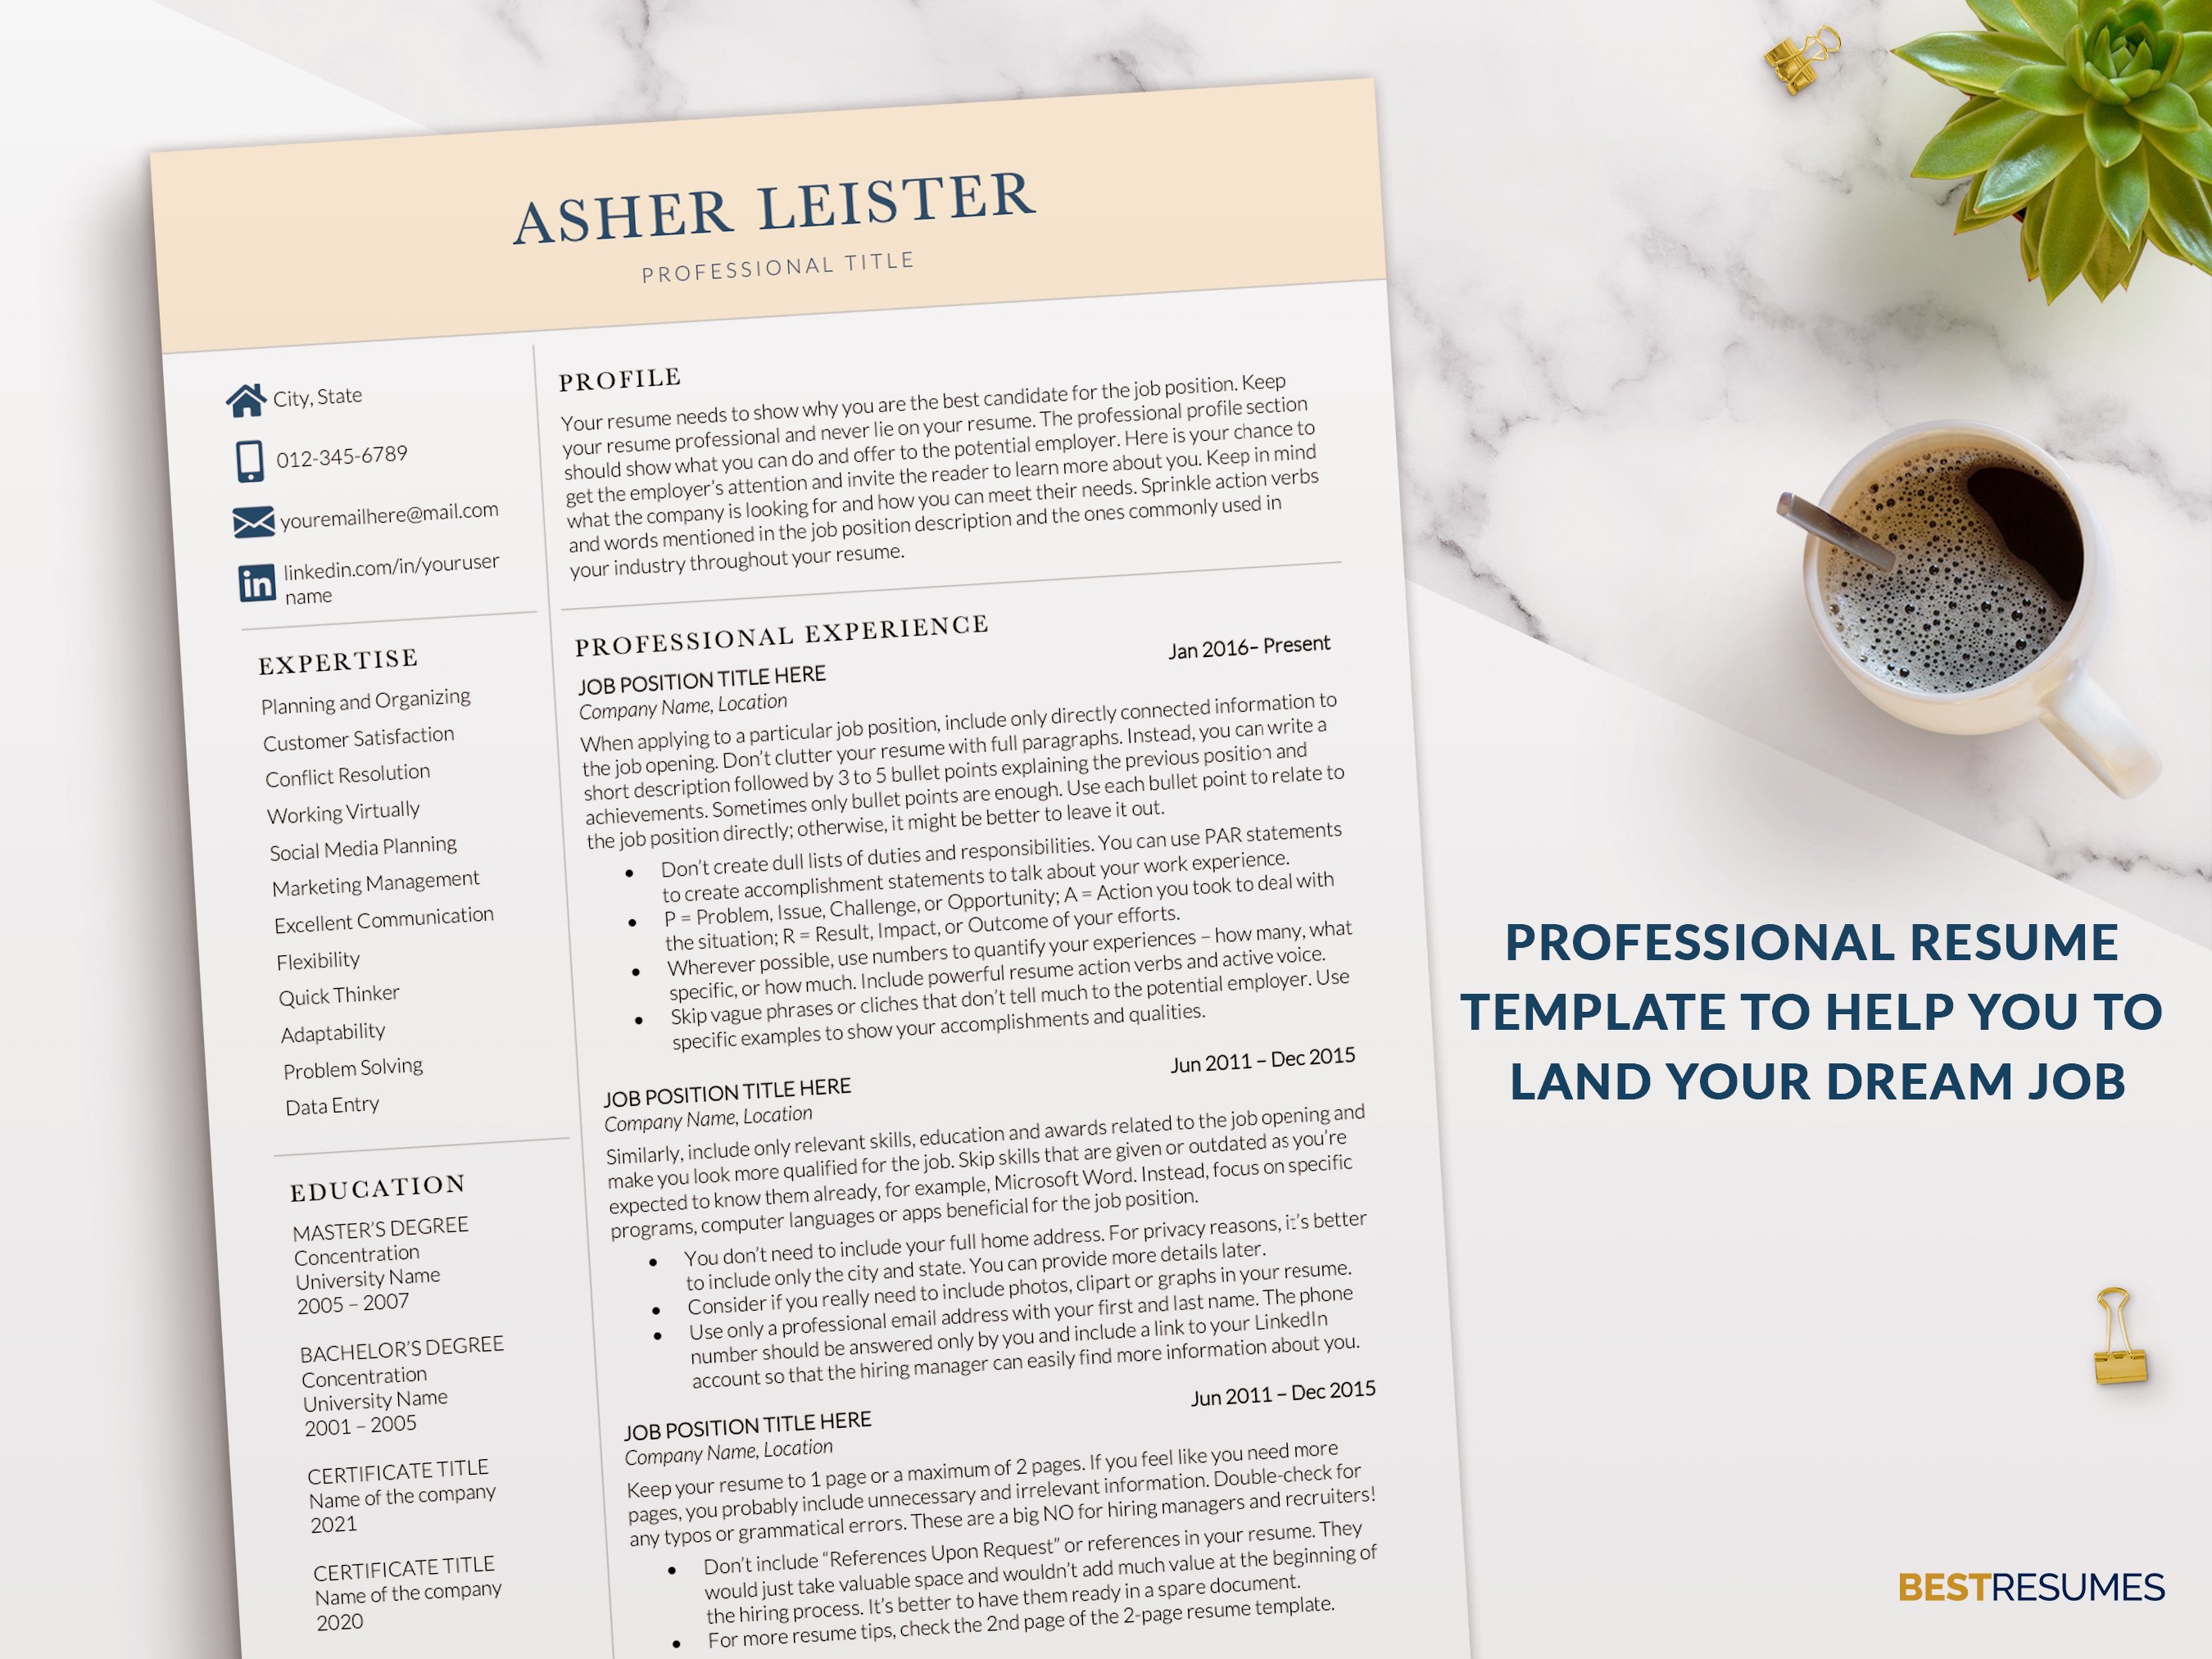 professional resume template resume one page asher leister 375